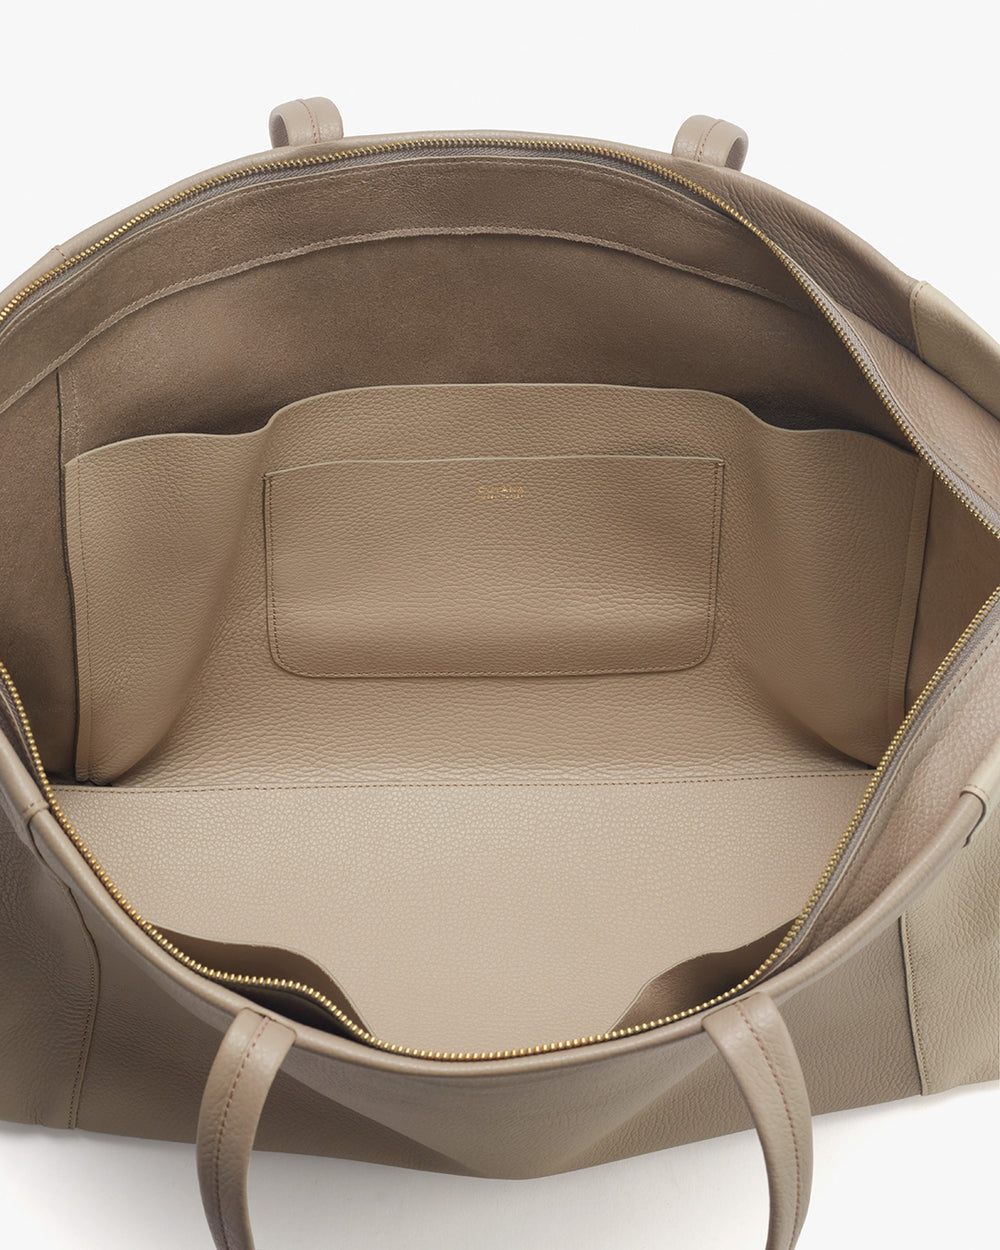 Inside view of an open leather bag showing pockets and zipper.